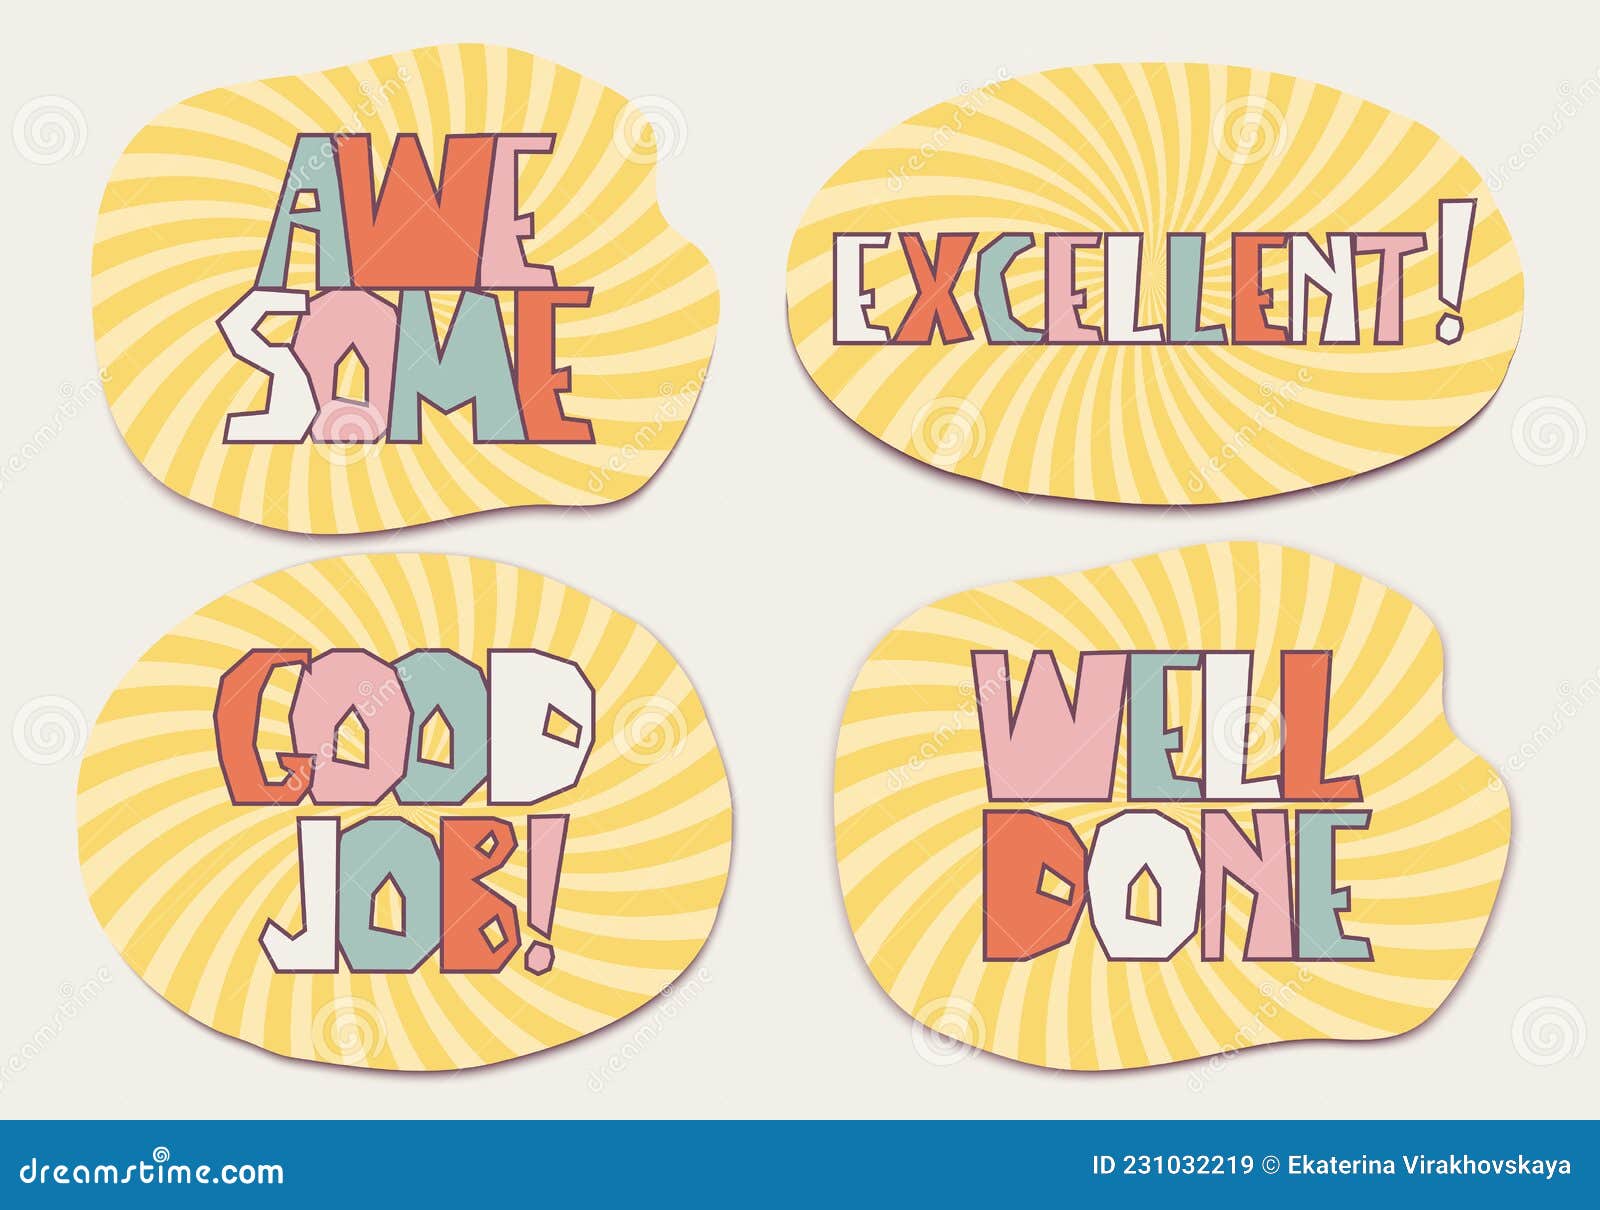 Awesome Excellent Good Job Well Done Sticker Quote Lettering On A